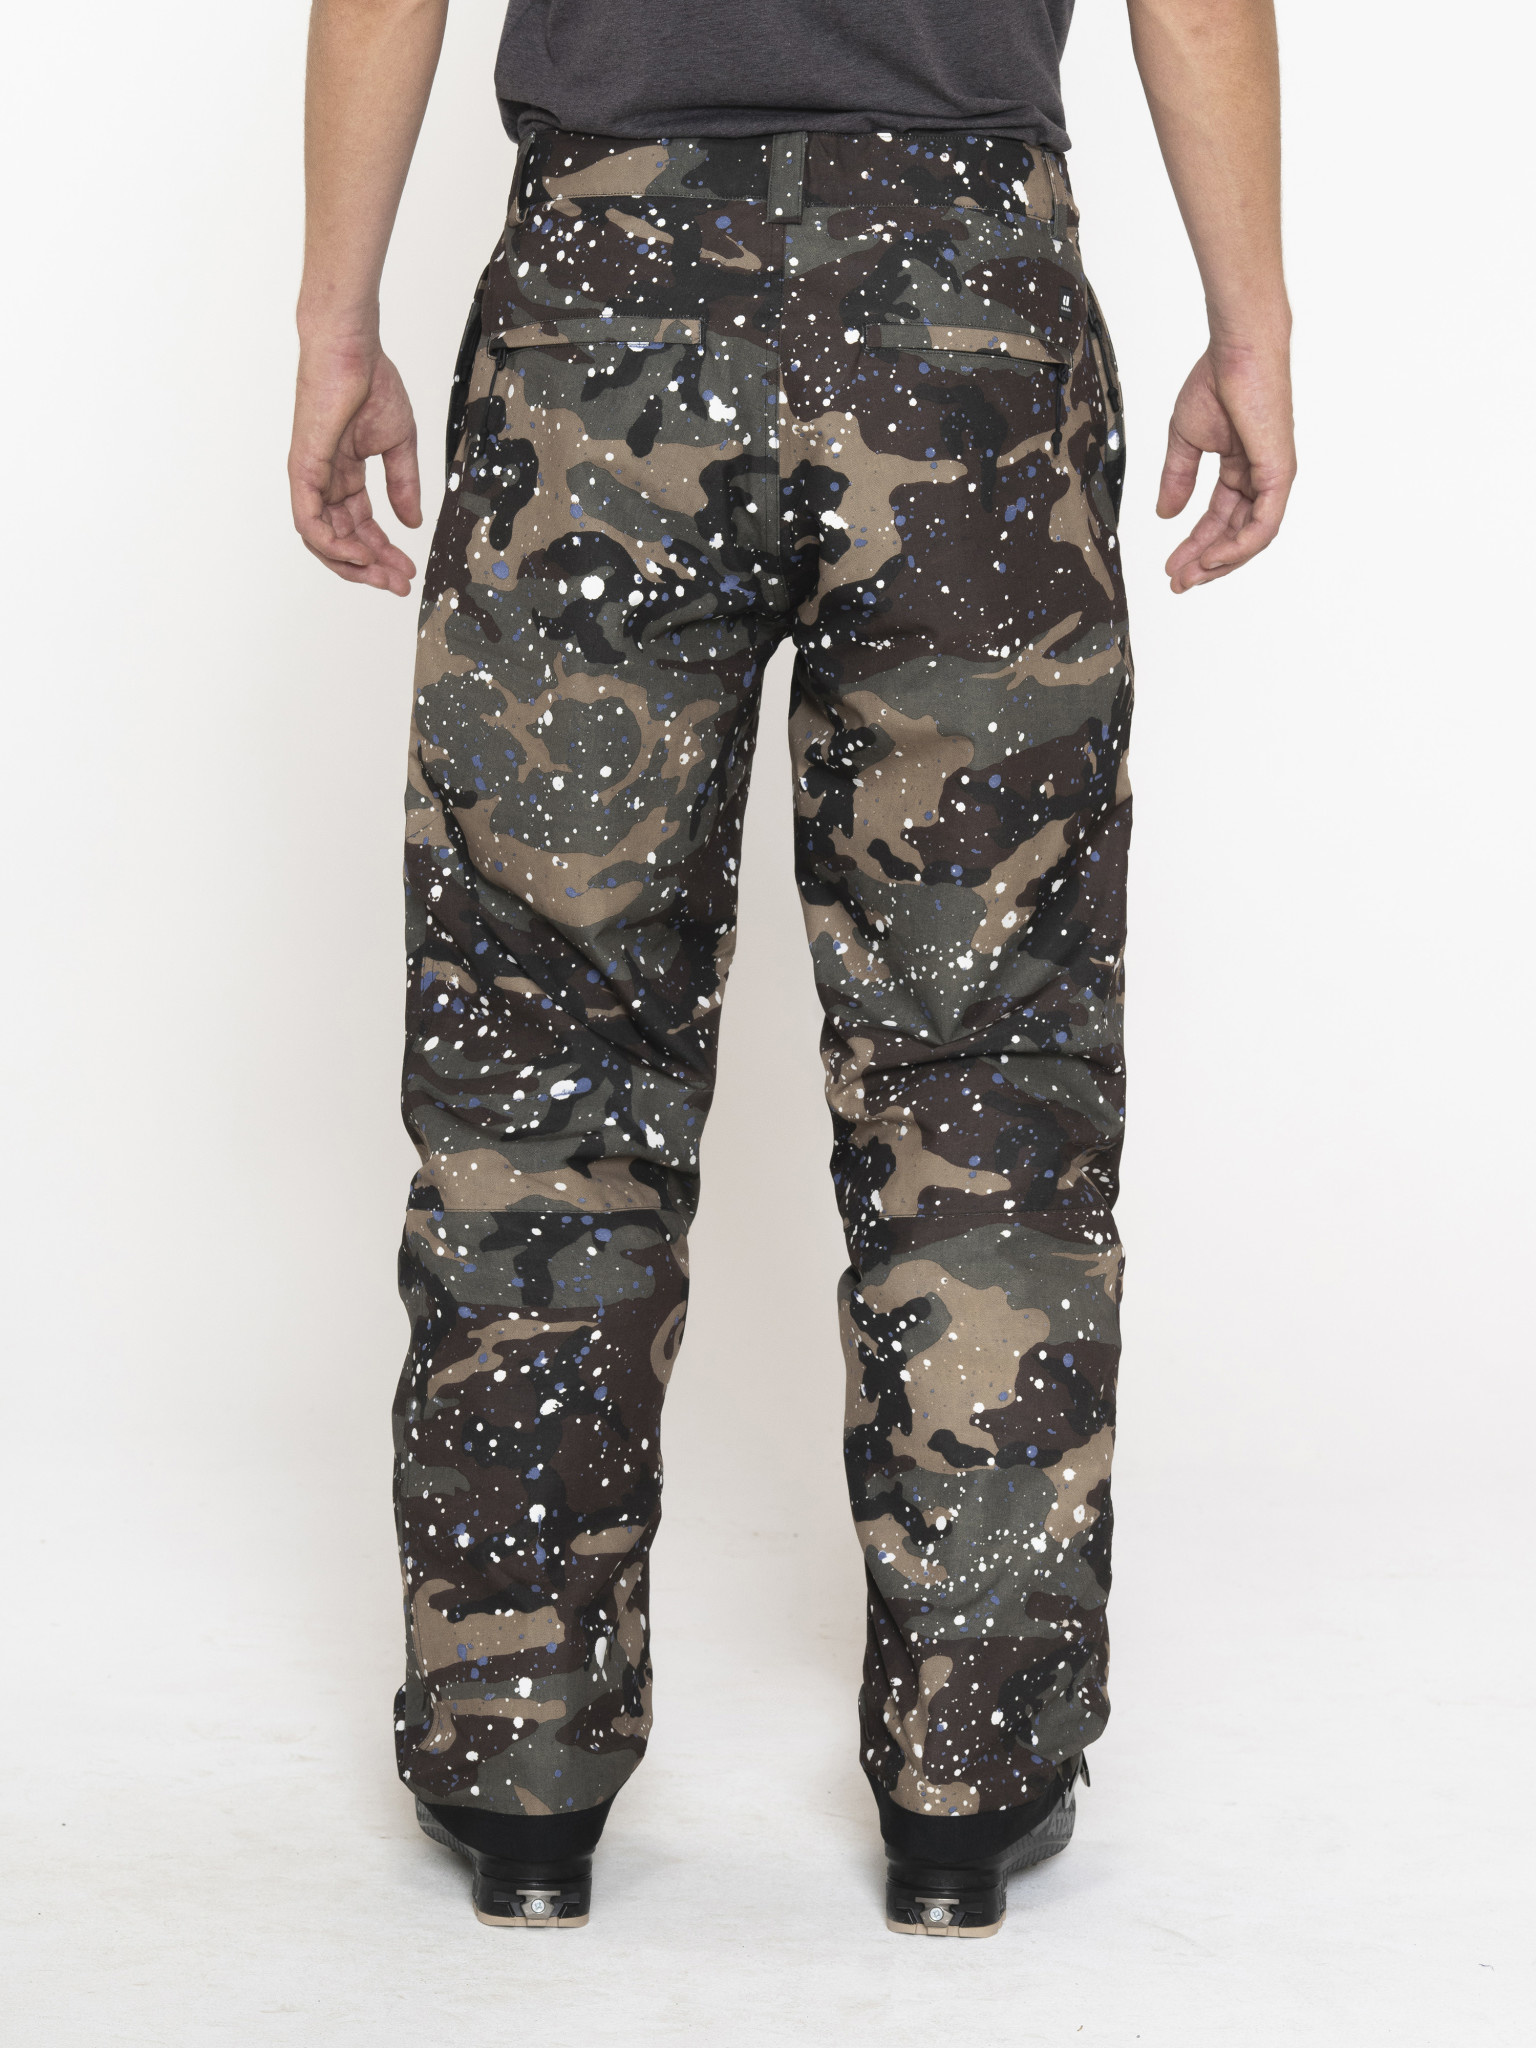 Army Pants, Family-Owned Company